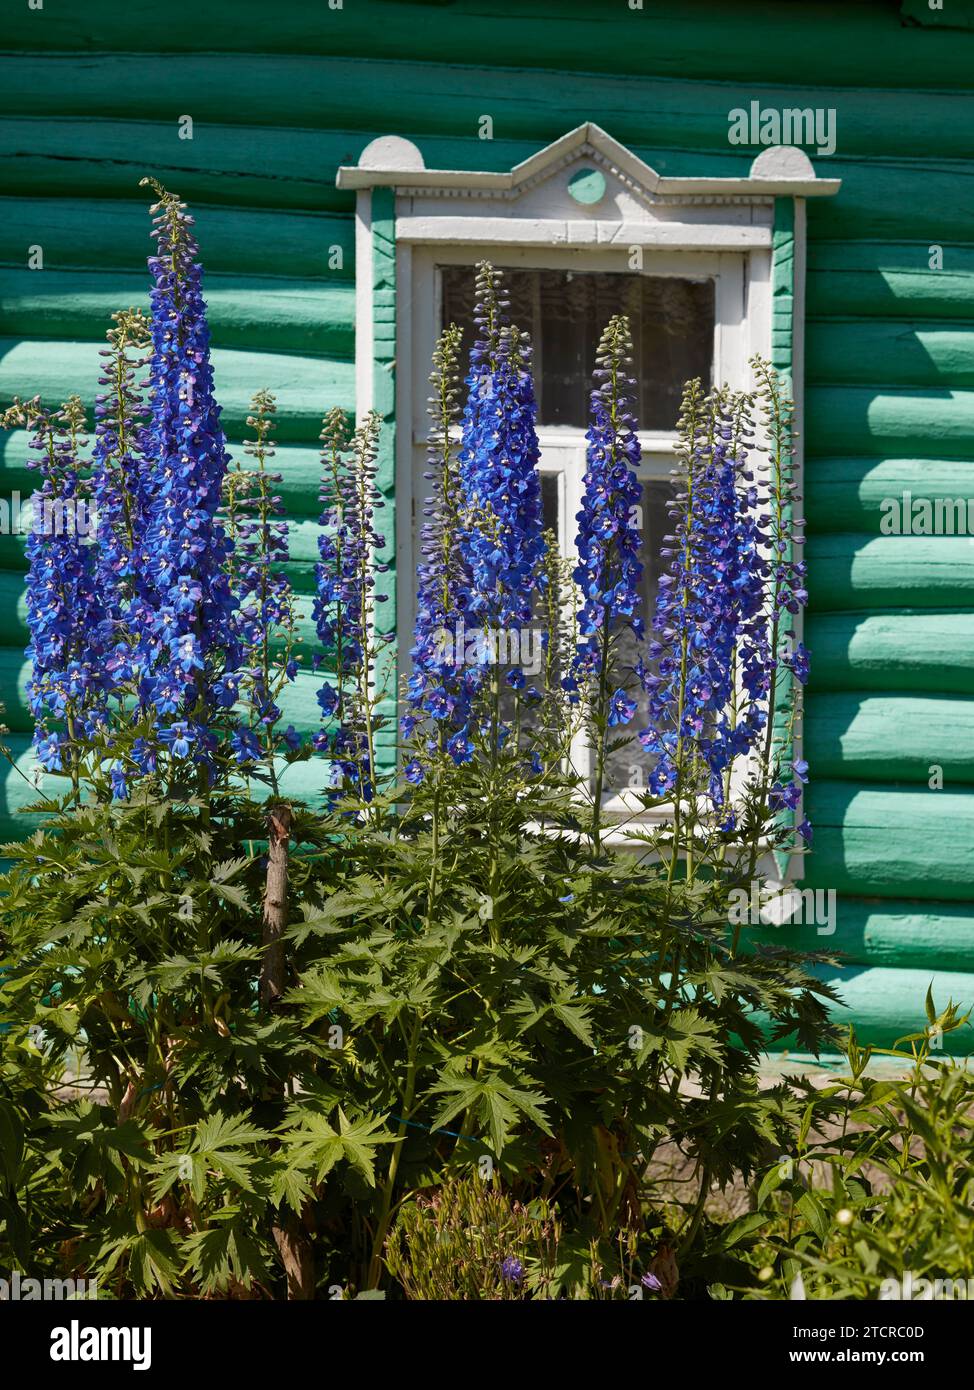 Delphiniums grow in front of a window in old log house. Kaluga Oblast, Russia. Stock Photo